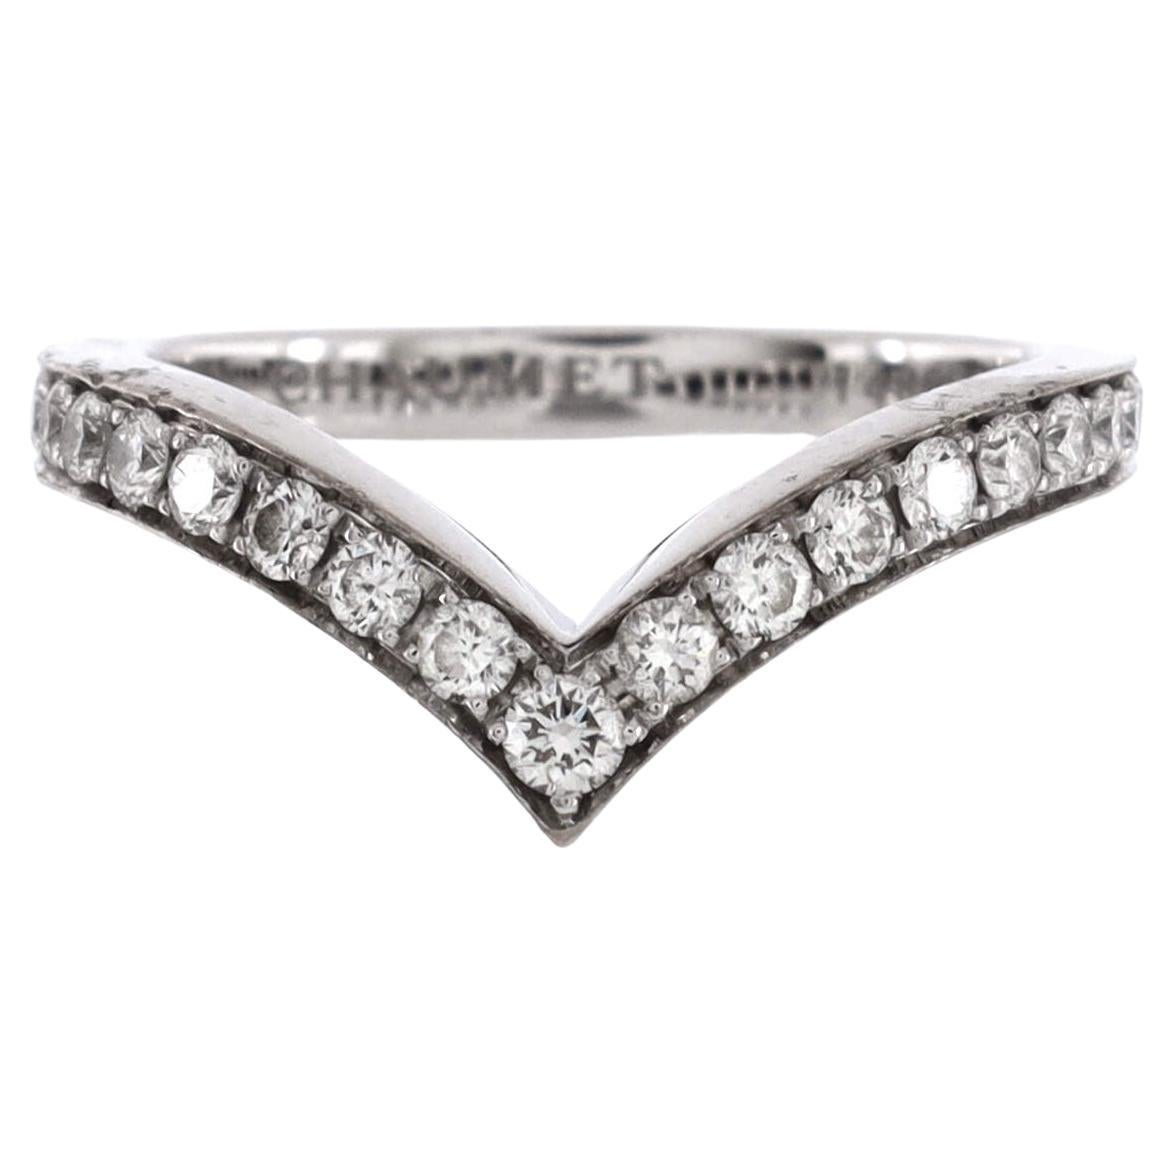 Chaumet Josephine Aigrette Ring 18k White Gold and Pave Diamonds